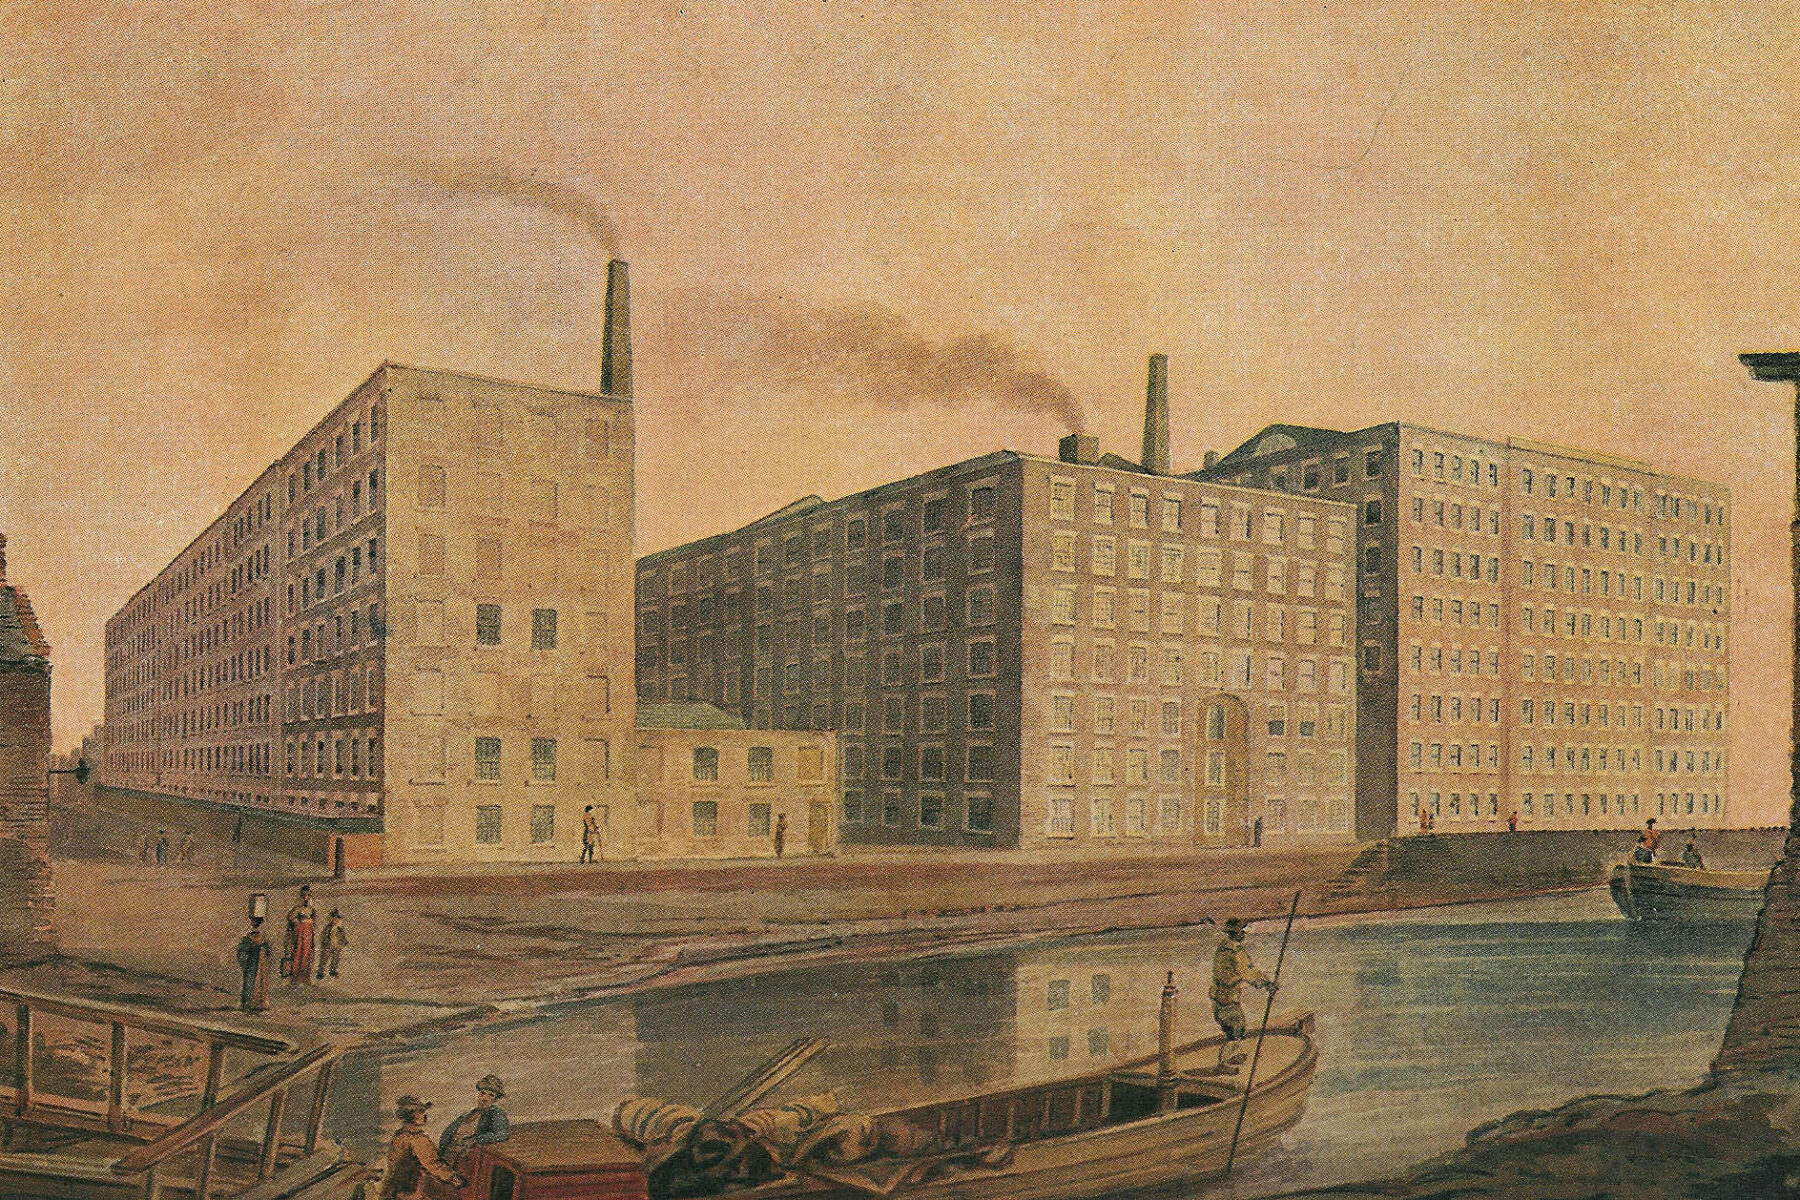 mcconel company mills about 1820 manchester slavery links walking tour